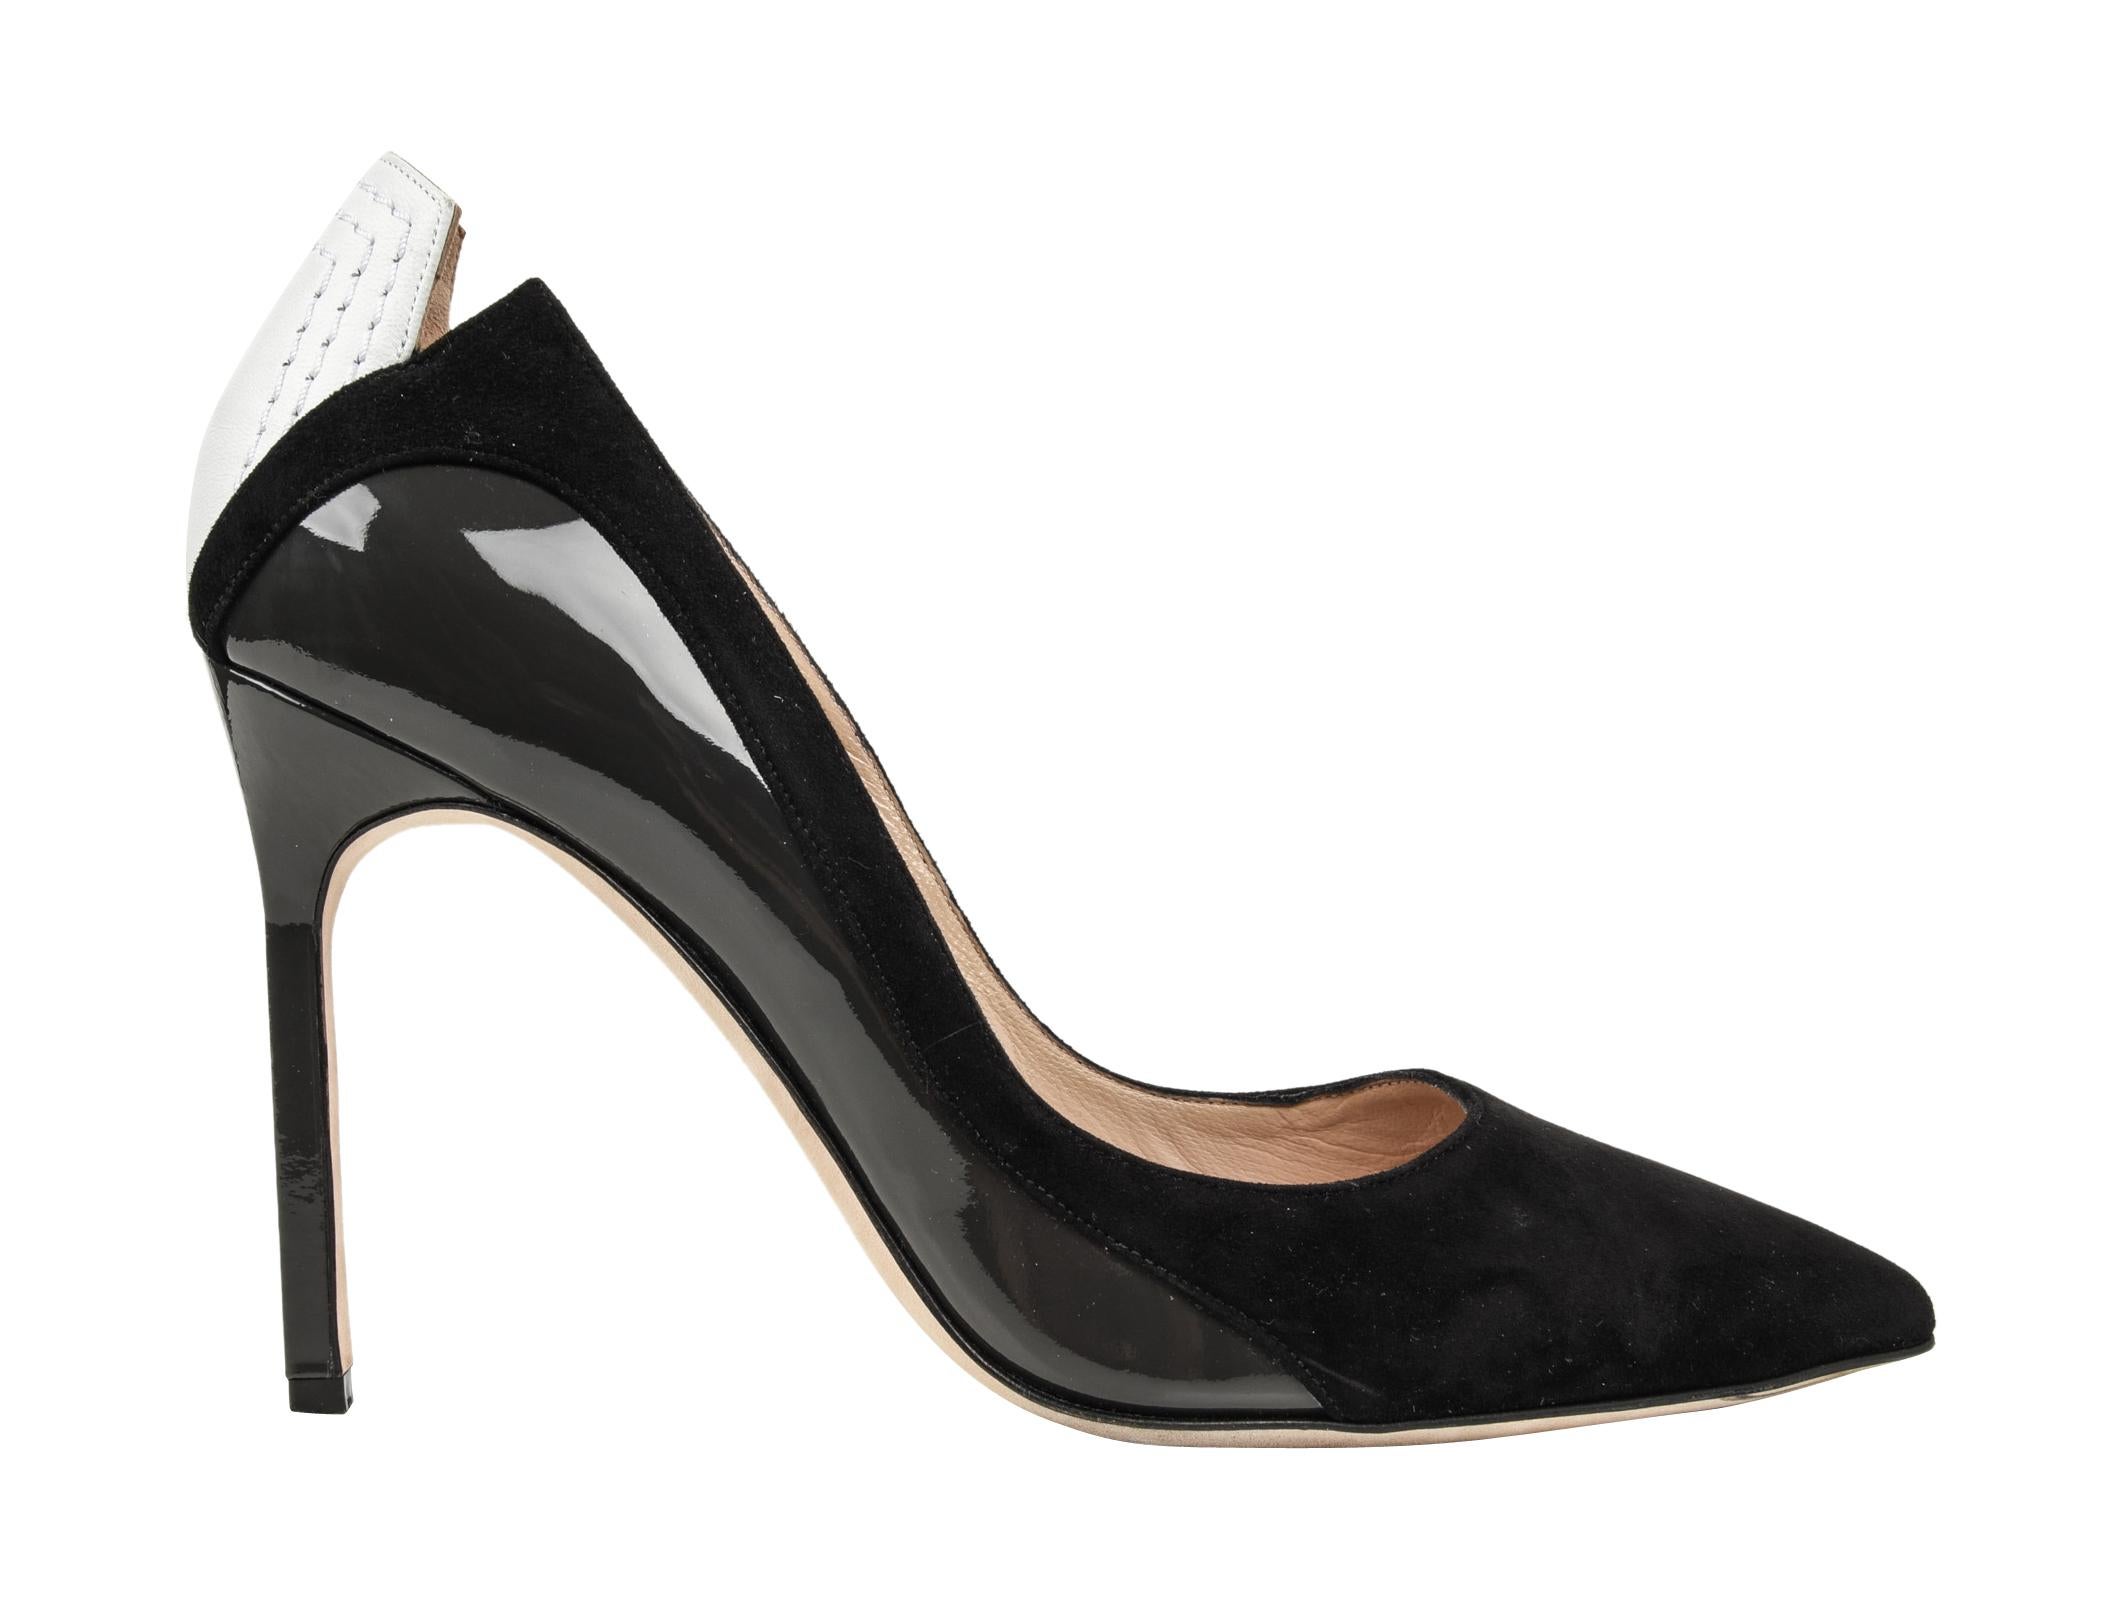 Guaranteed authentic Manolo Blahnik pump in black suede, charcoal patent leather and white leather.
Top of shoe is black suede, the sides are charcoal patent leather and black suede and the rear is white leather with tonal topstitch. 
Notched detail